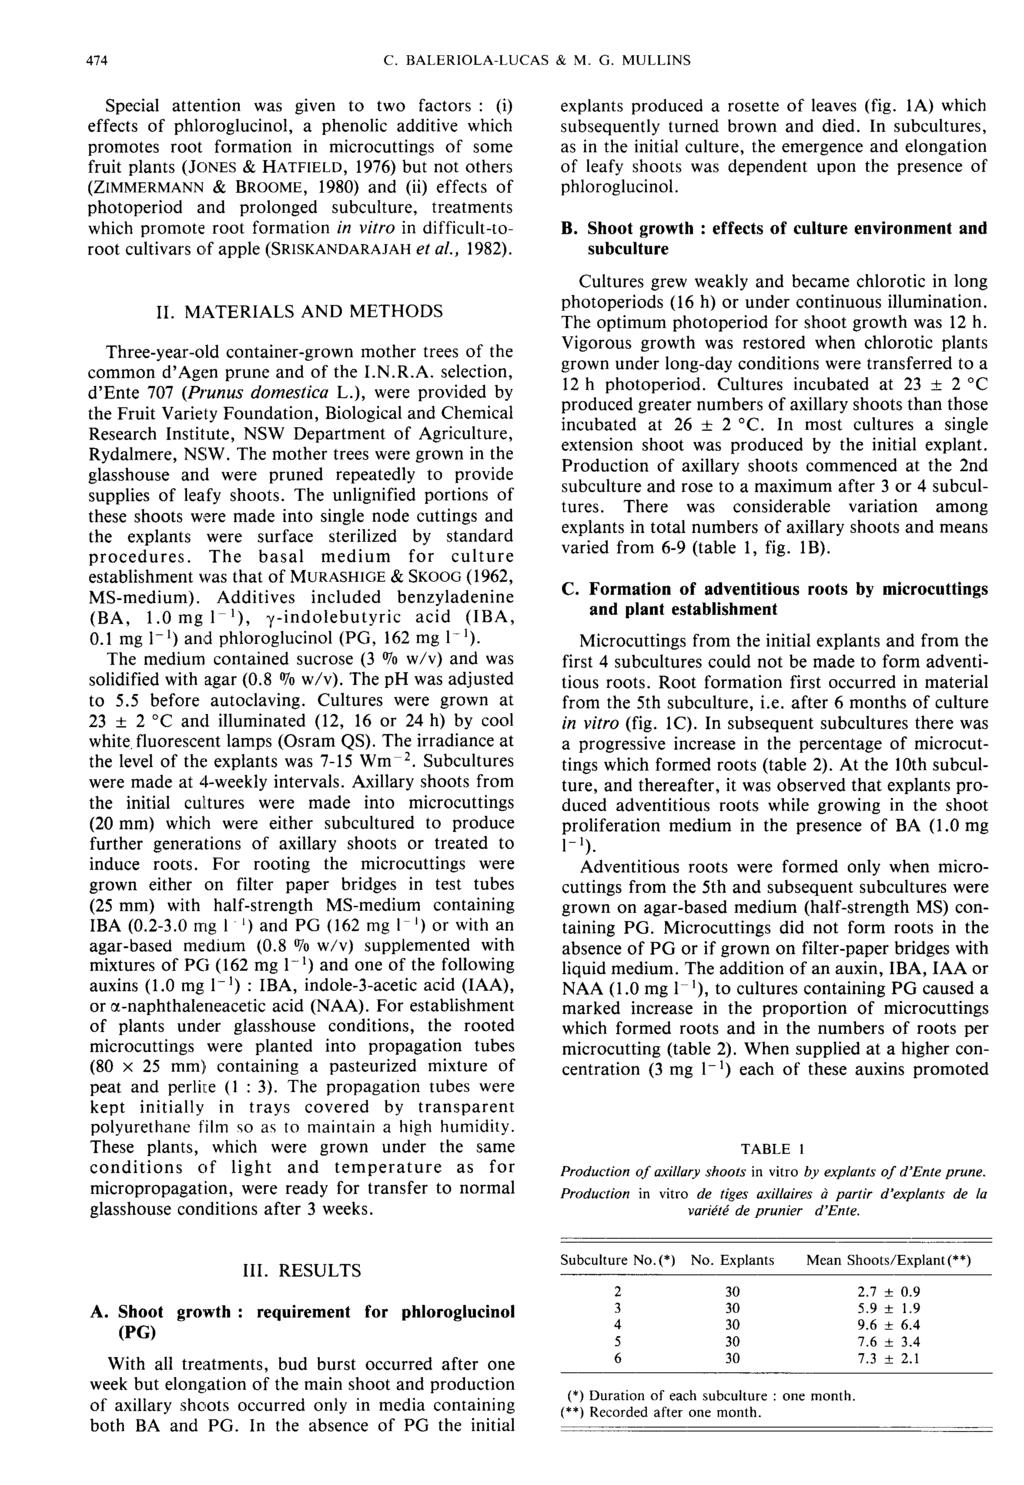 Special attention was given to two factors : (i) effects of phloroglucinol, a phenolic additive which promotes root formation in microcuttings of some fruit plants (JONES & HATFIELD, 1976) but not